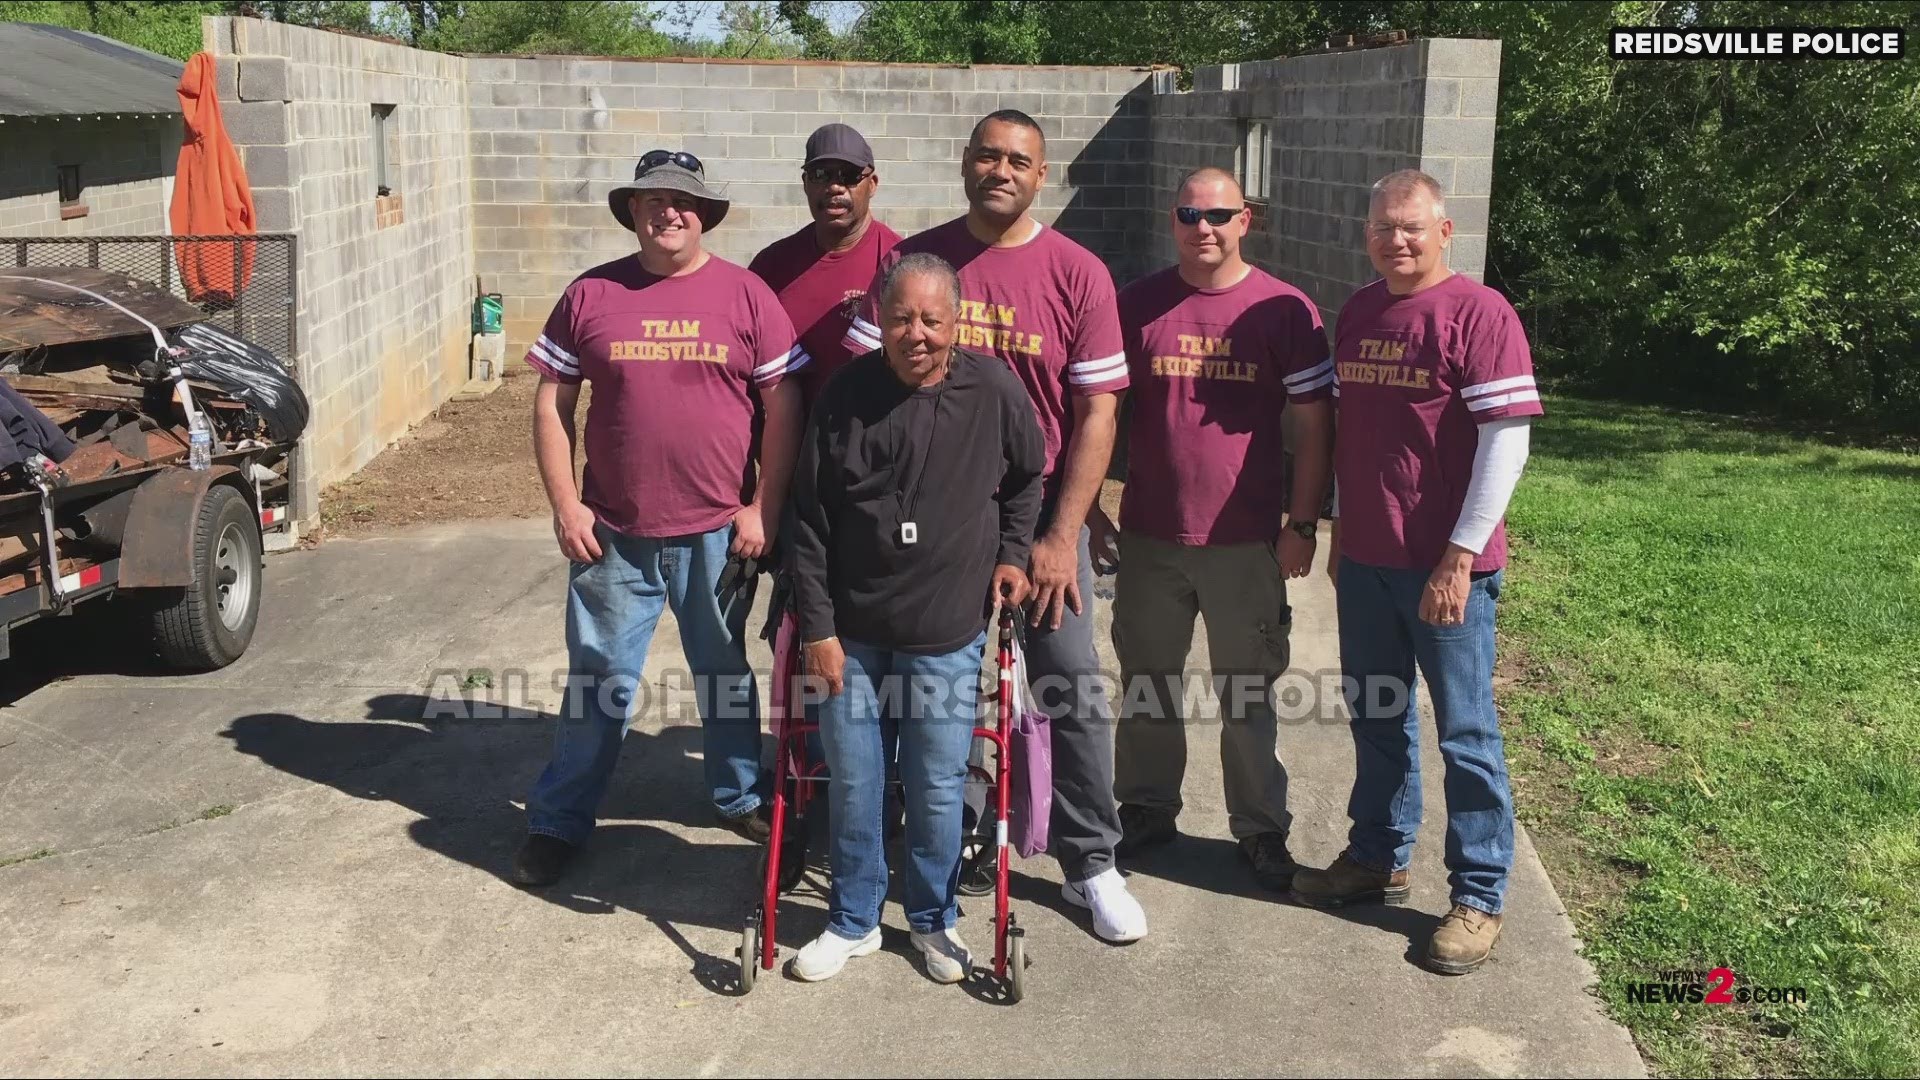 It’s their mission to serve and protect and that’s exactly what five officers including the Reidsville Police Chief did while helping a woman in the community. Mrs. Louise Crawford needed help after her garage collapsed. The officers showed up and surprised her by clearing the debris.